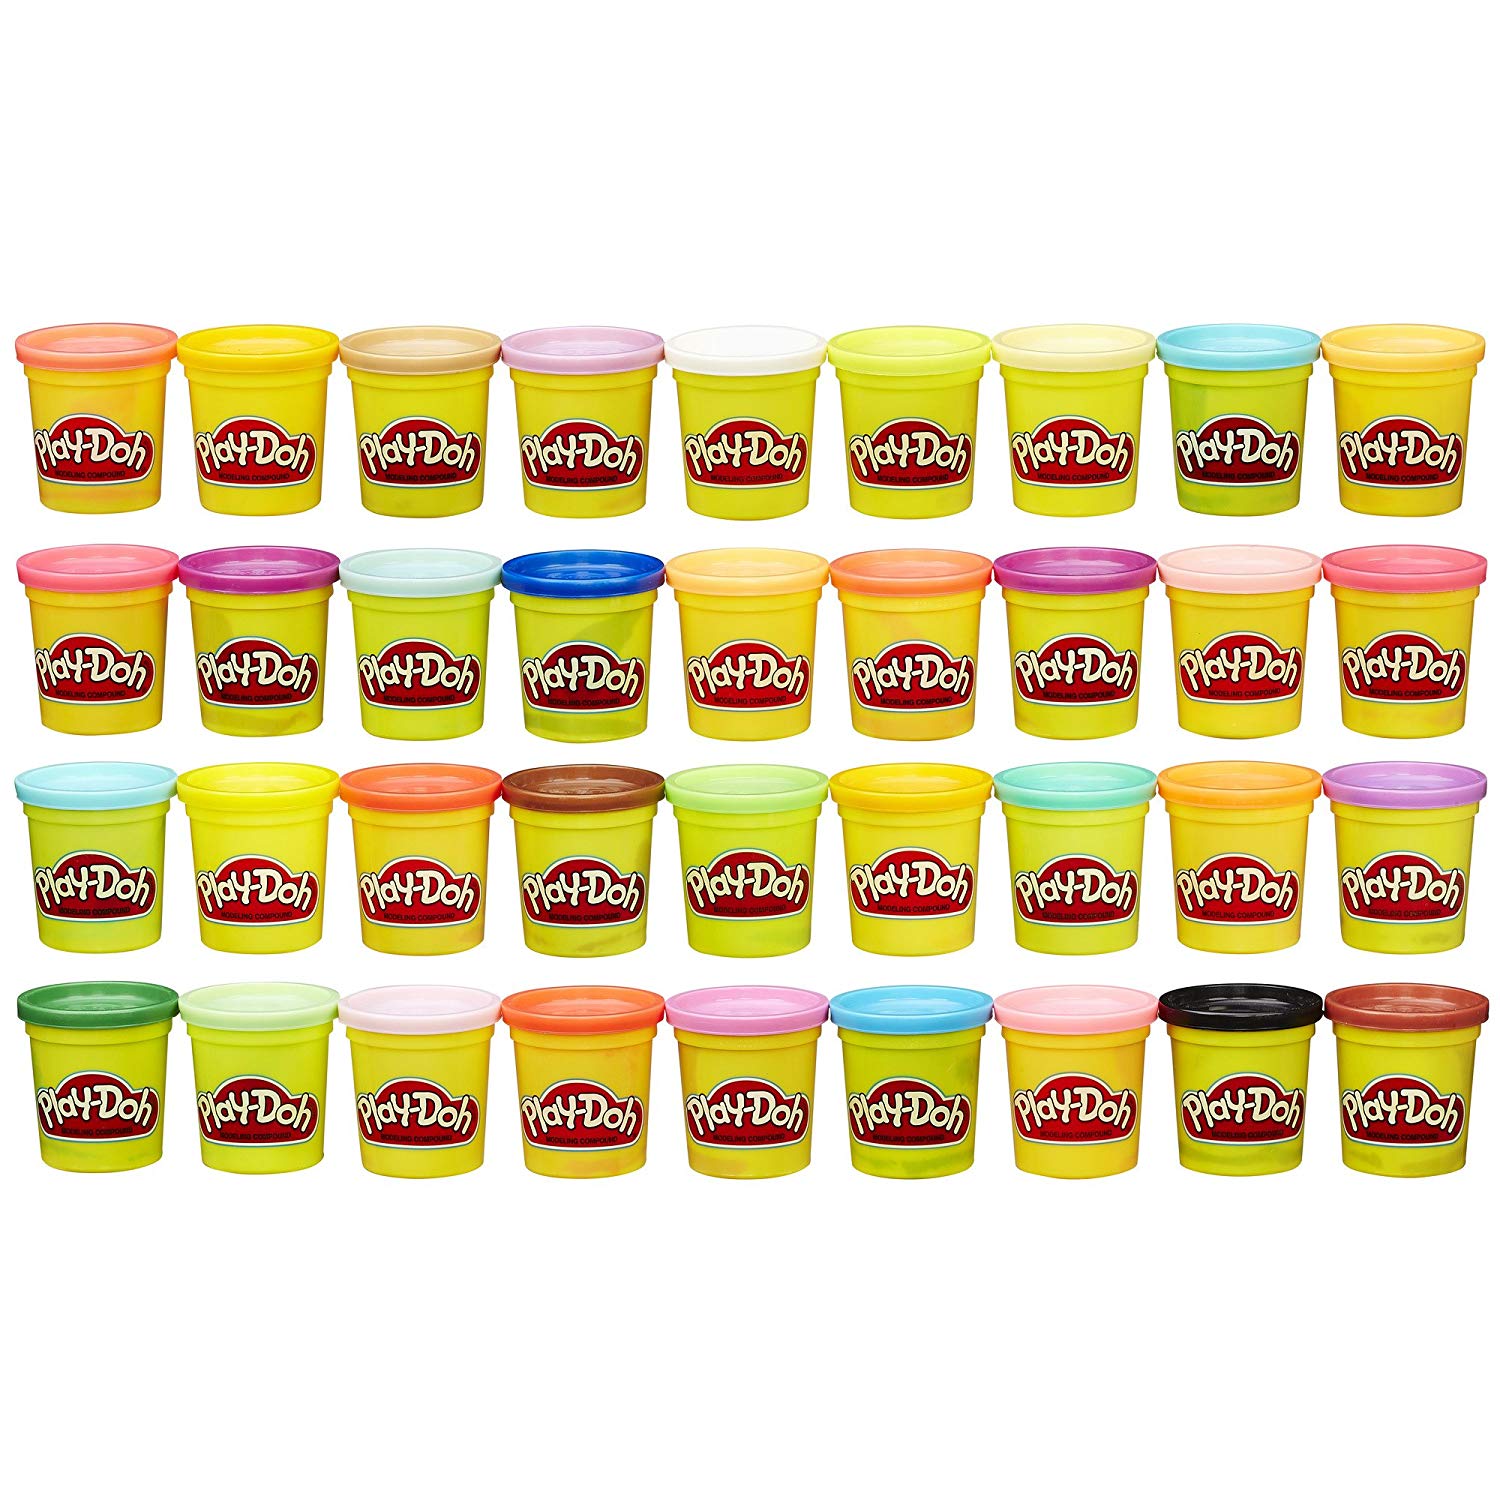 36 pack of Play doh on Amazon - Best Gifts for Little Kids - Here's my big list of Best Toy Gifts for Little Boys. These are the toys my kids actually play with, all the time. Includes small gifts, science kits, art supplies, trucks, and outdoor toys. Plus, 5 toy gift fails. #AbbottsAtHome #BestToys #KidsToys #GiftIdeas #BestGifts #GiftGuide